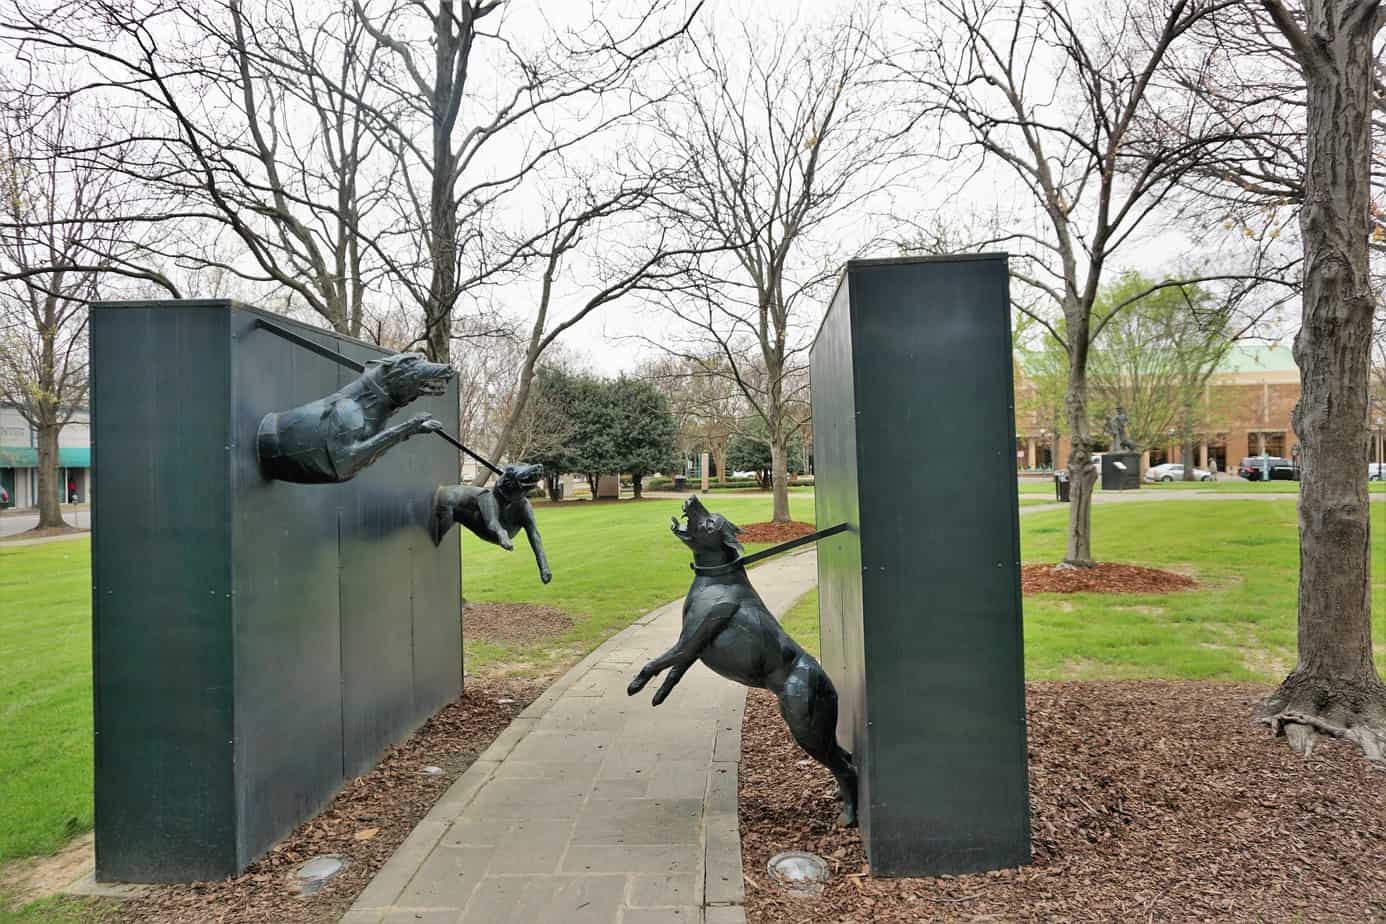 Graphic Statue in Kelly Ingram Park of Attack Dogs Used by Birmingham Police